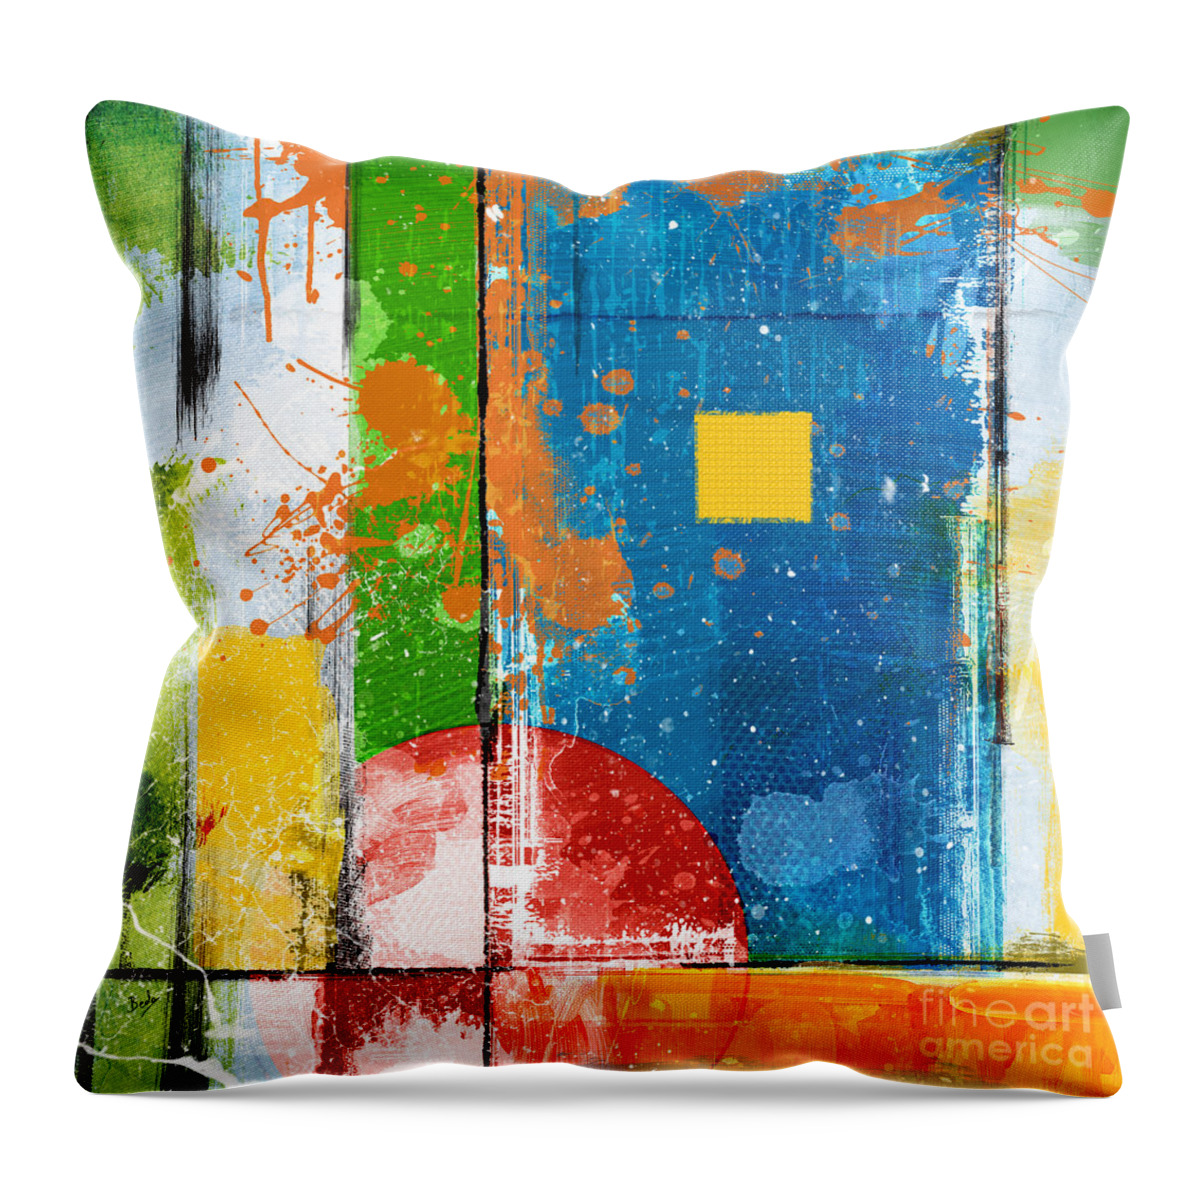 Yellow Throw Pillow featuring the digital art Yellow Square by Peter Awax